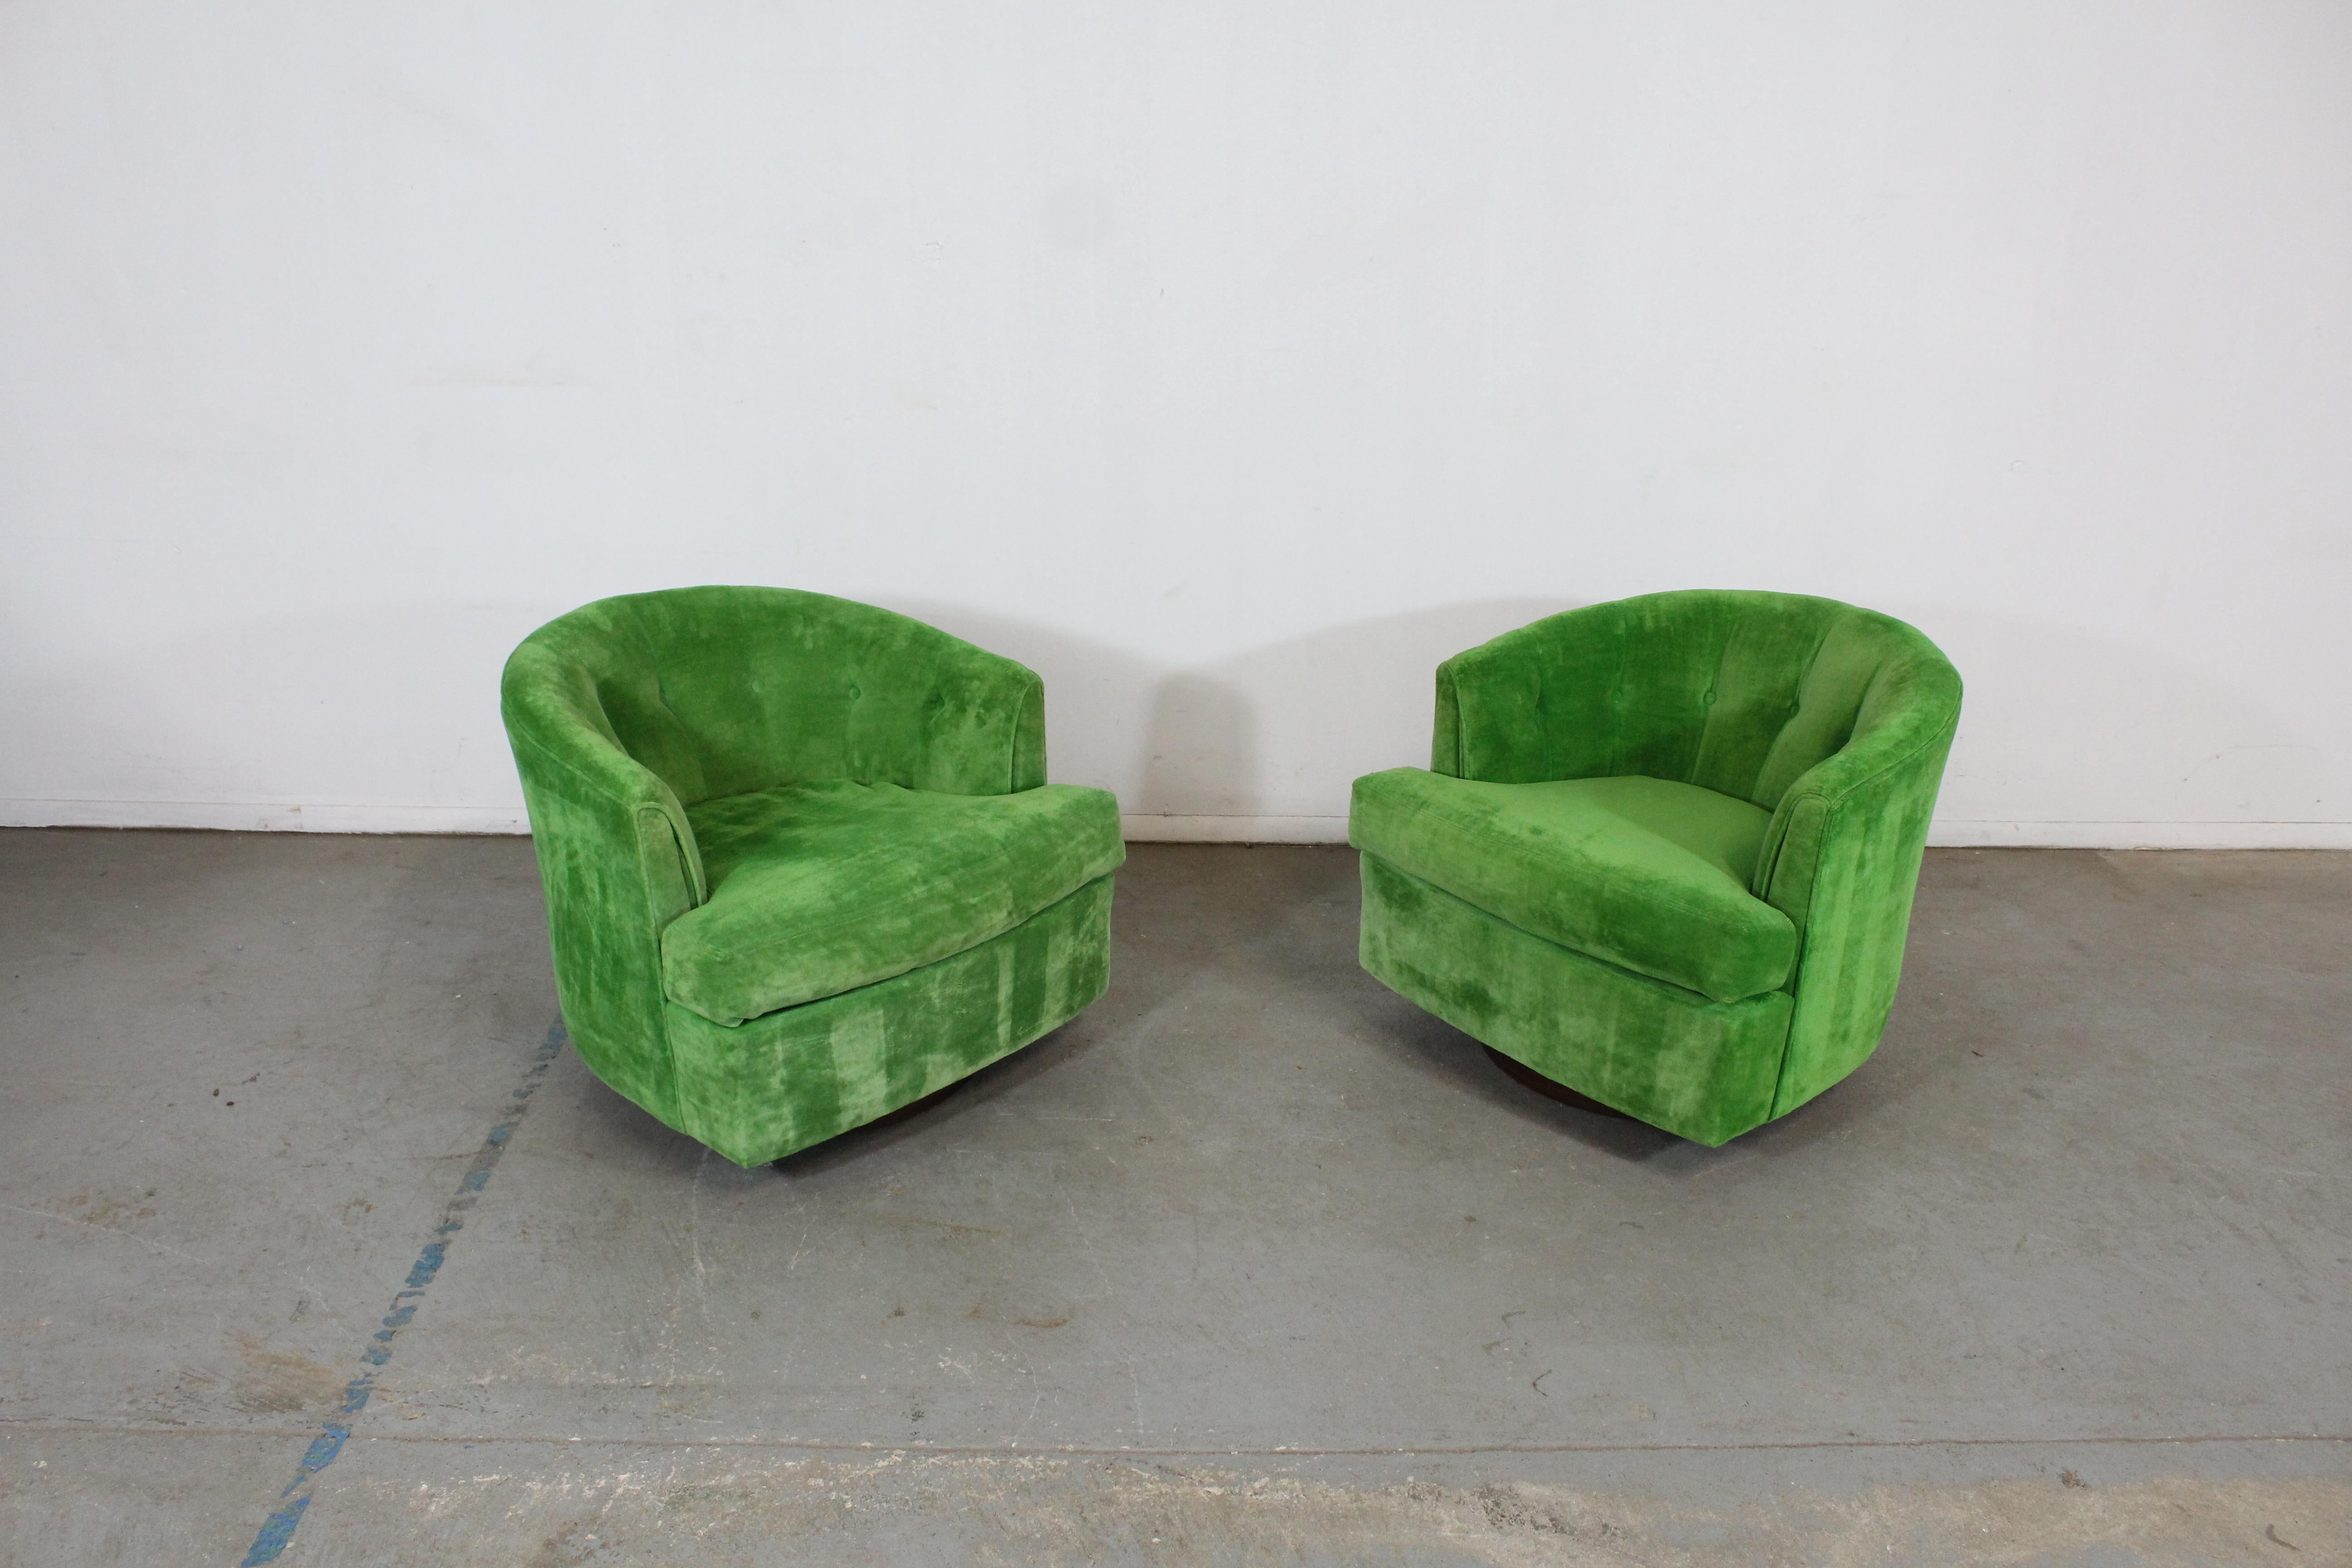 Pair of Mid-Century Modern Barrel Back Milo Baughman style Swivel Club Chairs

Offered is a pair of vintage Mid-Century Modern Milo Baughman style swivel chairs. These chairs have round backs and walnut bases. . They are in good condition. The